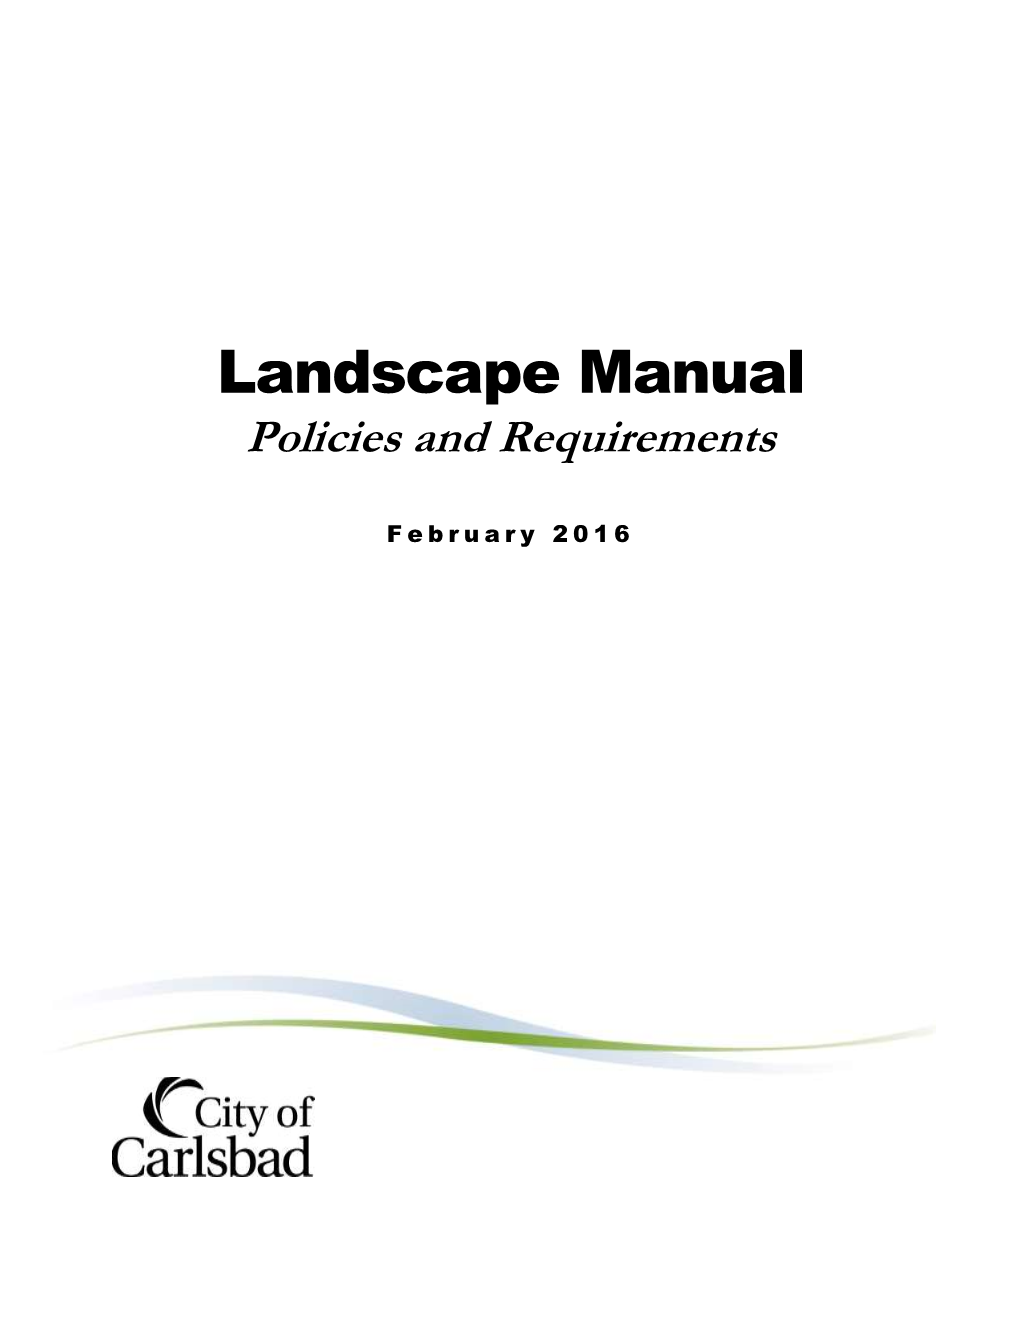 Landscape Manual Policies and Requirements